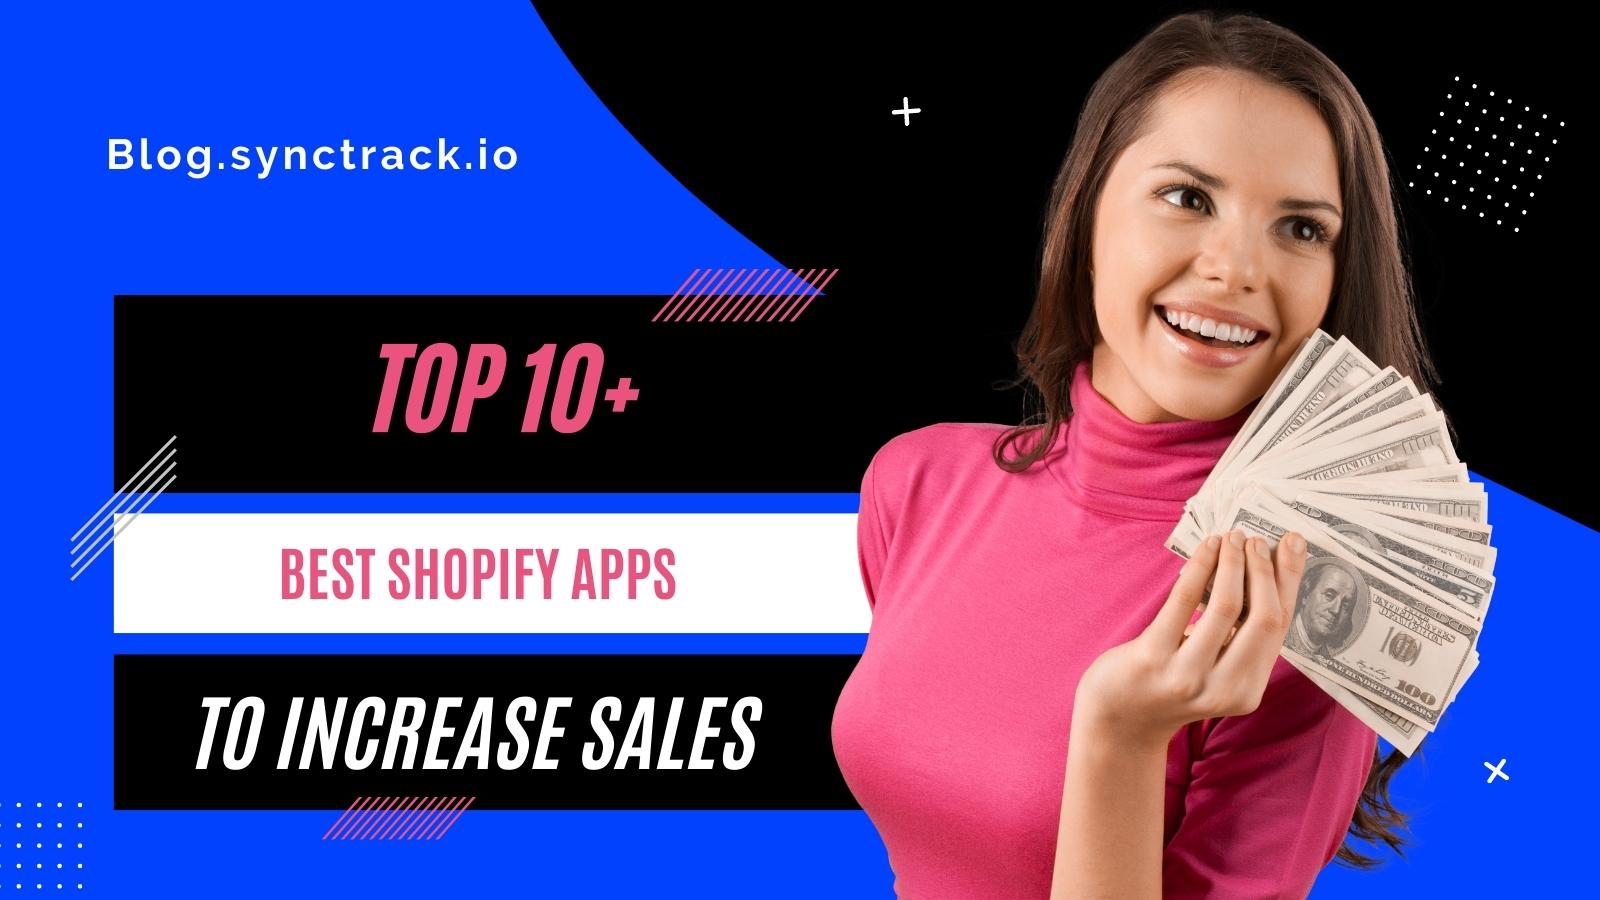 Top 10 best Shopify apps to increase sales